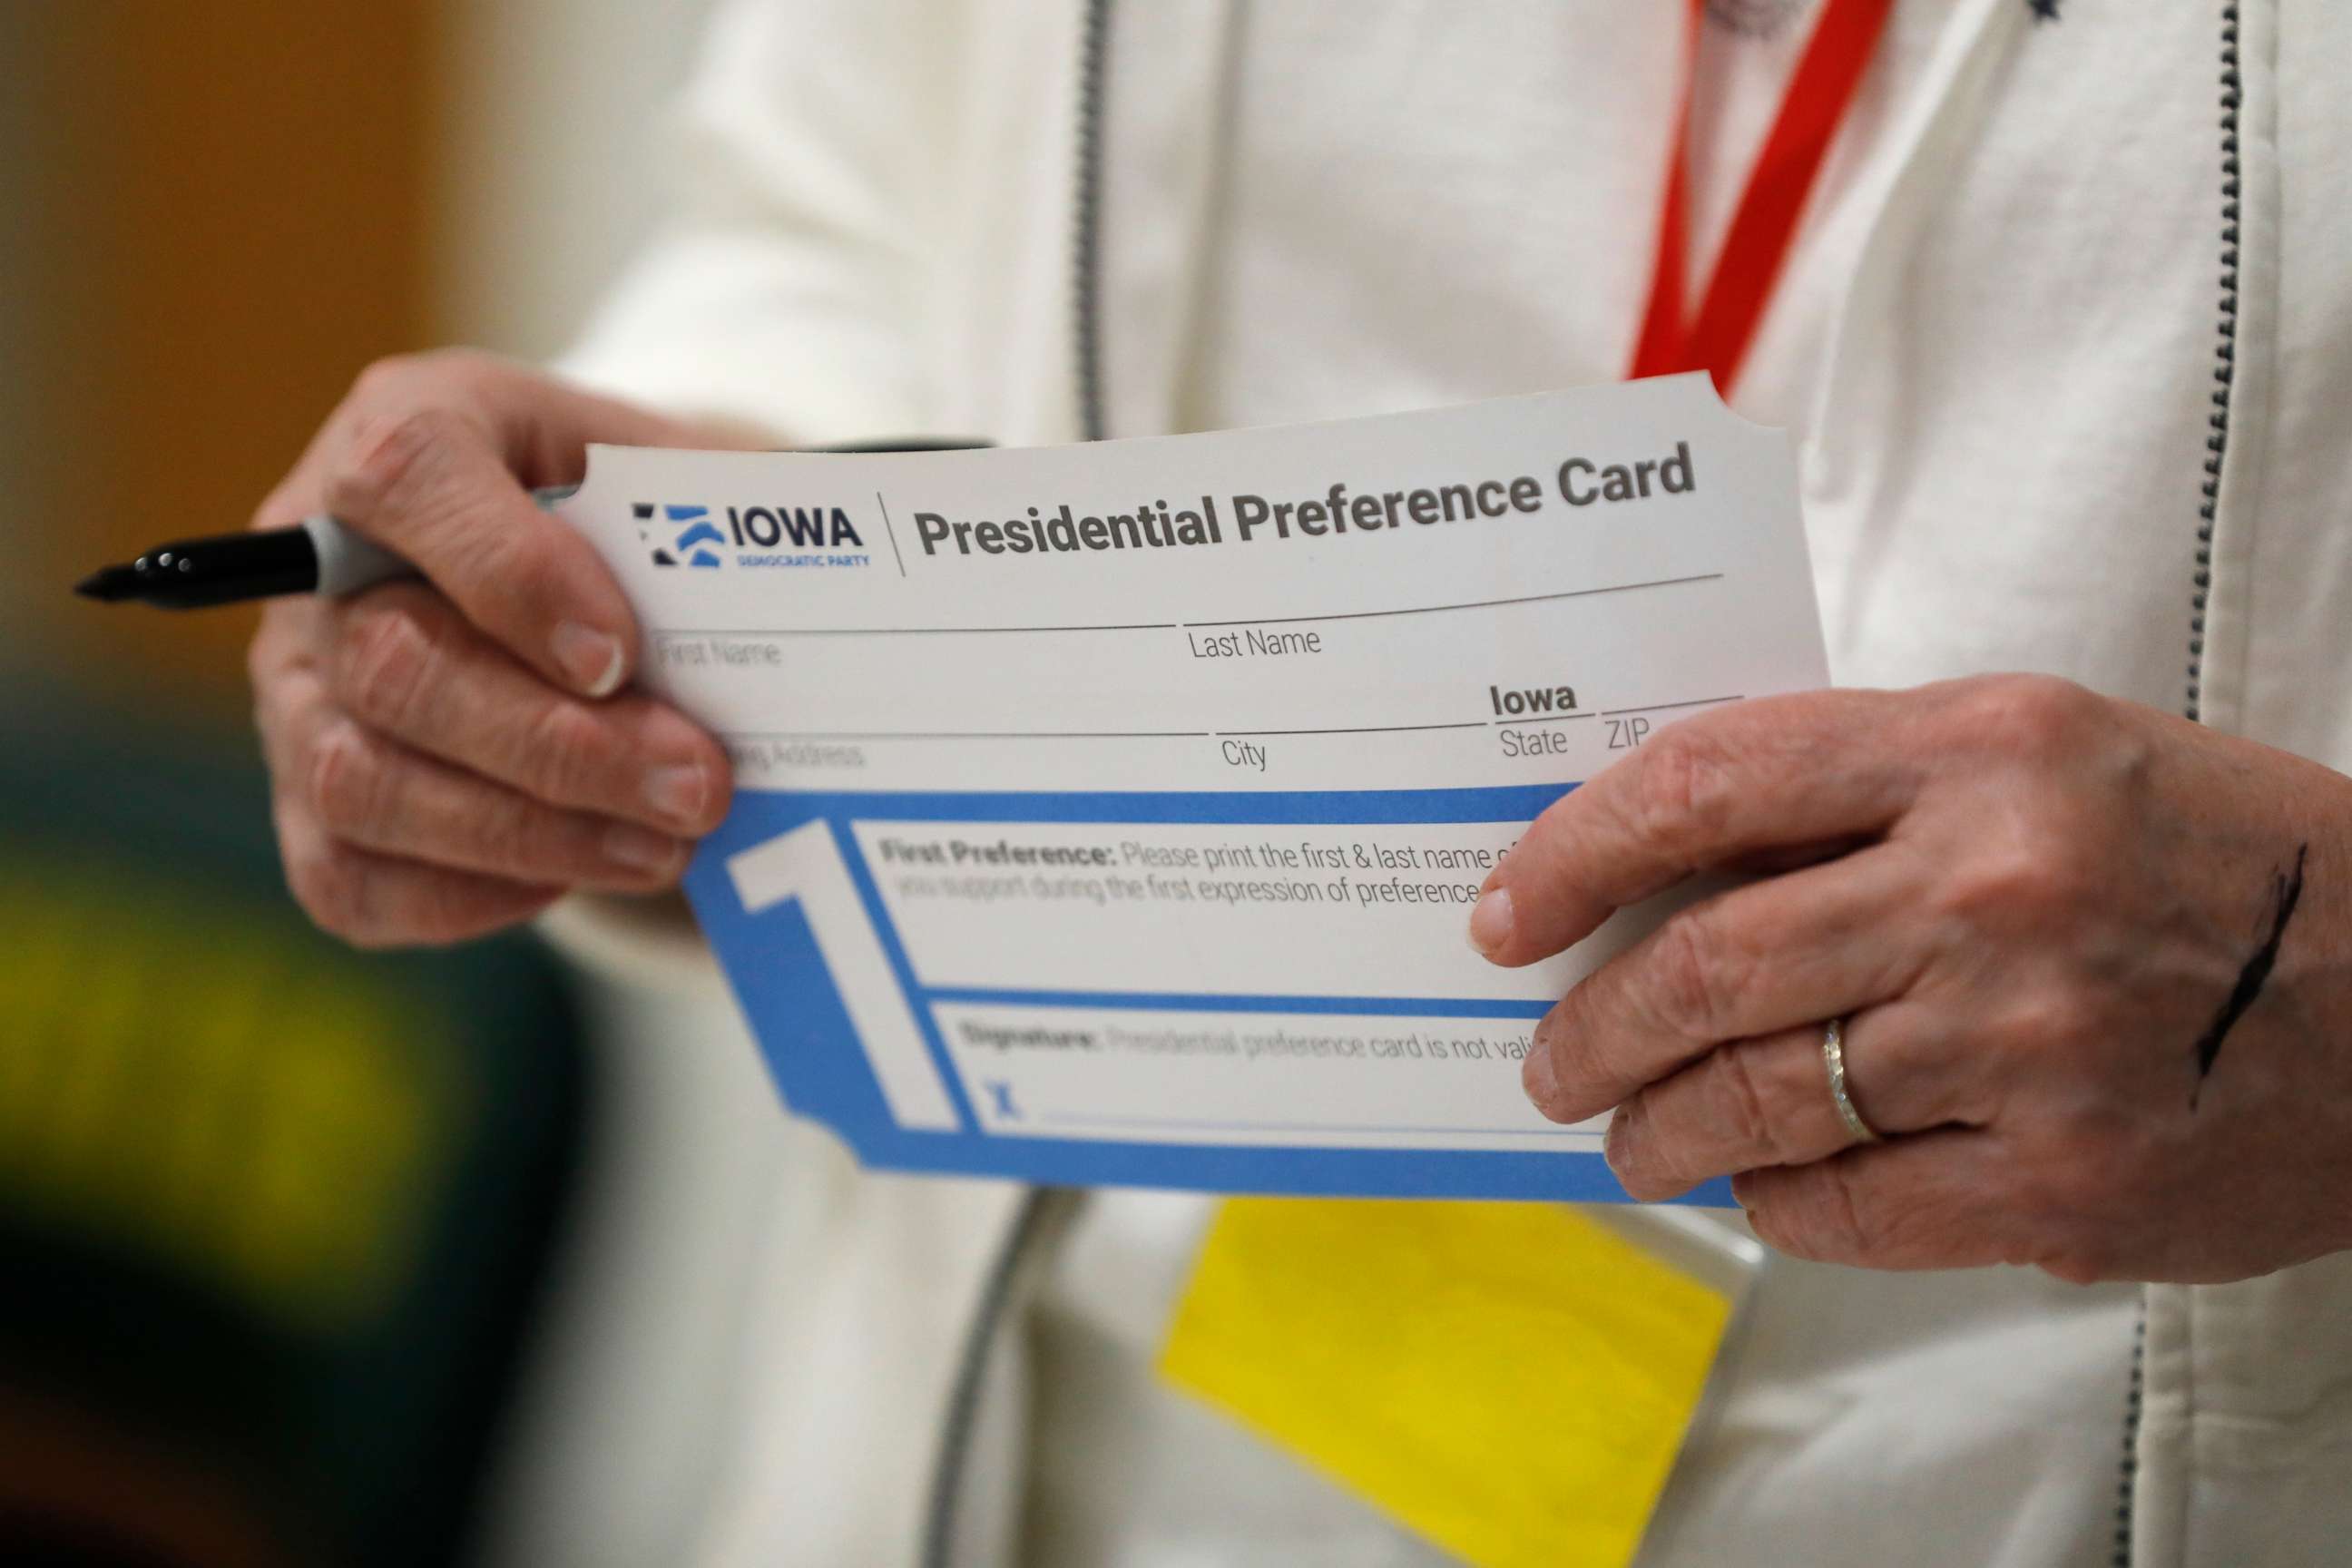 PHOTO: A volunteer holds a Presidential Preference Card before the start of a Democratic caucus at Hoover High School, Feb. 3, 2020, in Des Moines, Iowa.